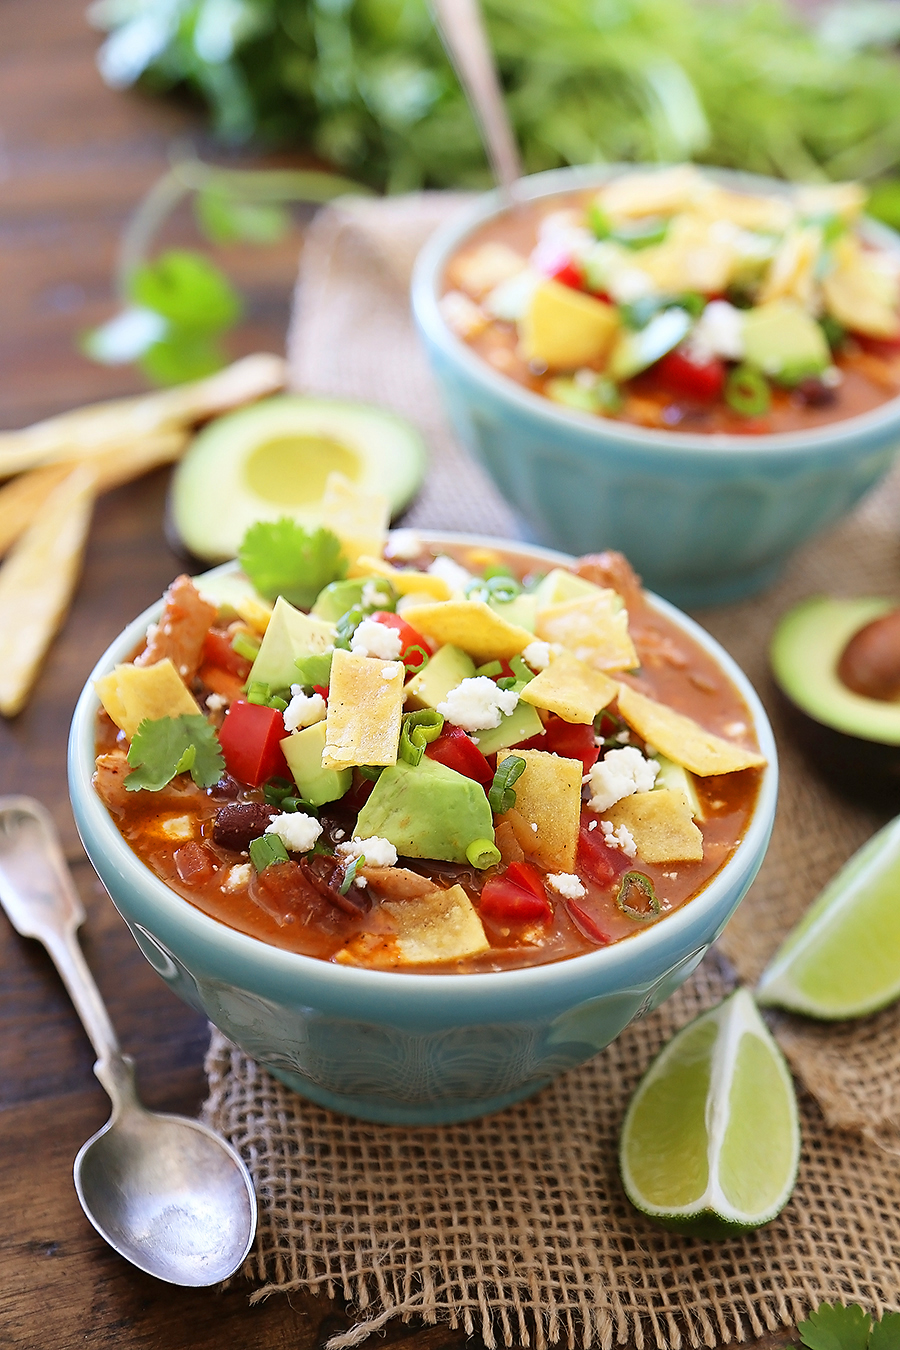 Easy Chicken Tortilla Soup - Serve this spicy, citrusy chicken tortilla soup for a fun twist on your weeknight meals! Add crunchy baked or fried tortilla strips (recipe included), cilantro, avocado and crumbled queso for a truly amazing soup! Thecomfortofcooking.com